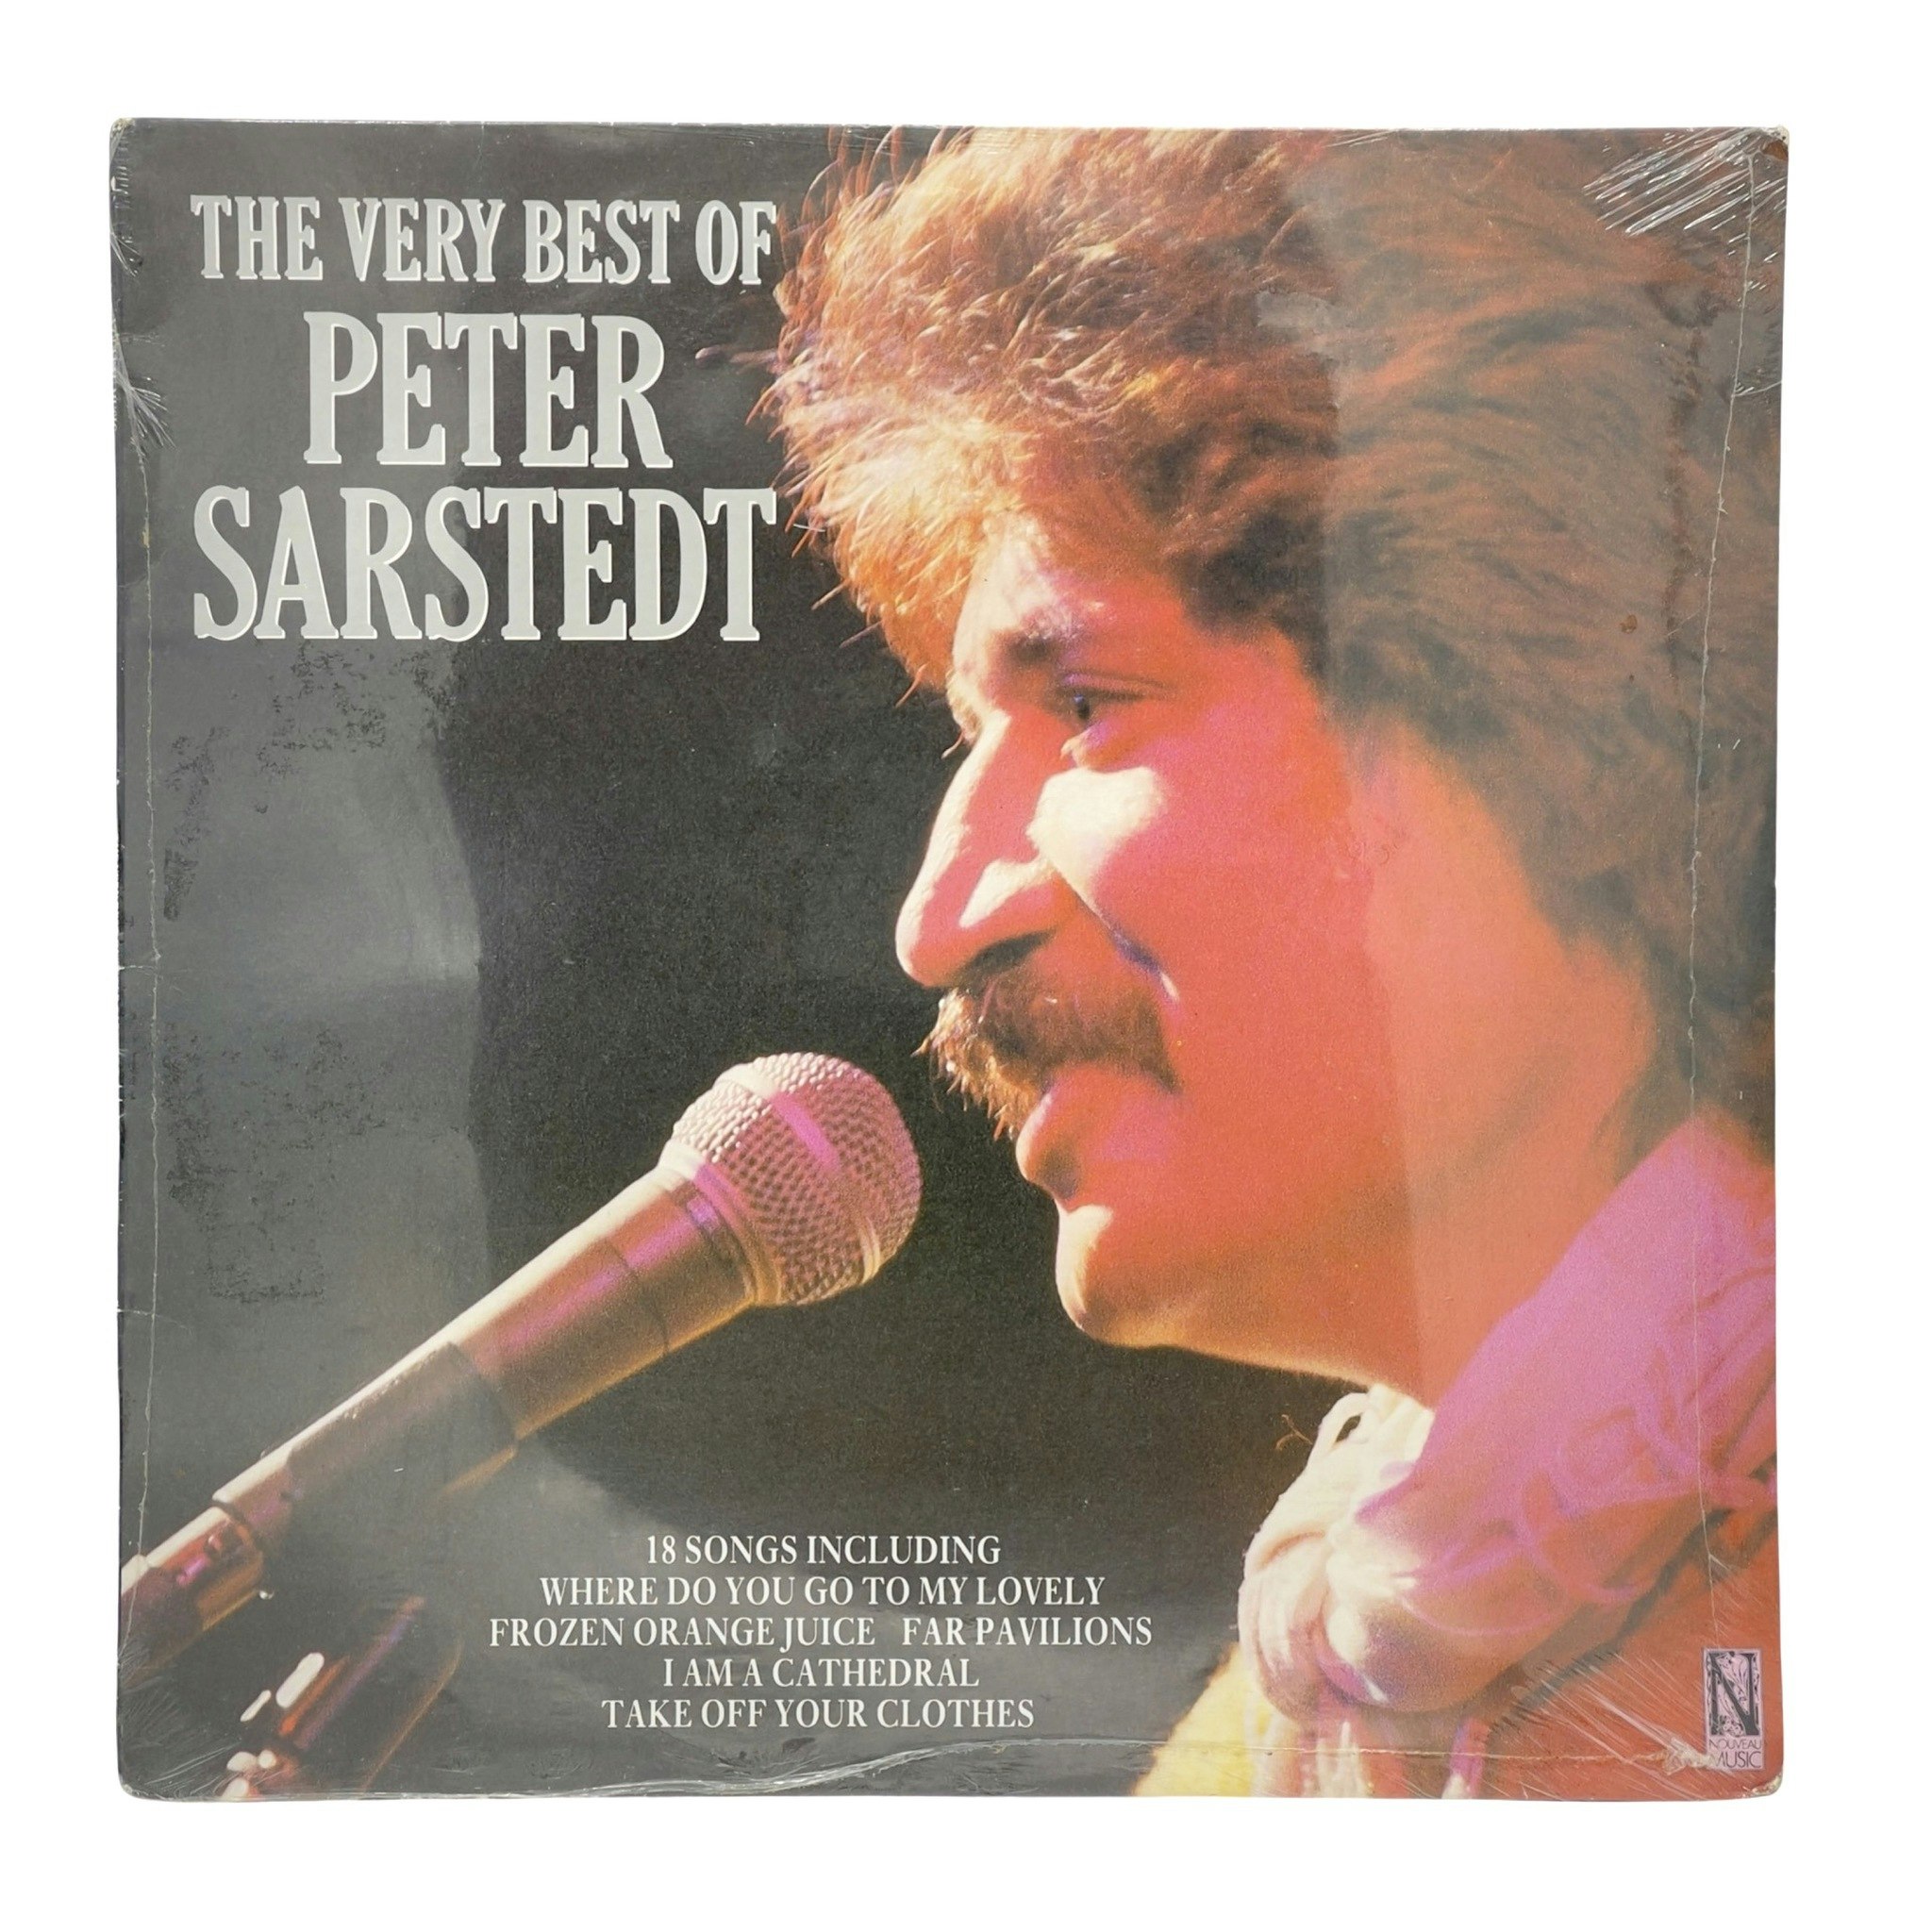 The Very Best of Peter Sarstedt Vinyl LP NY